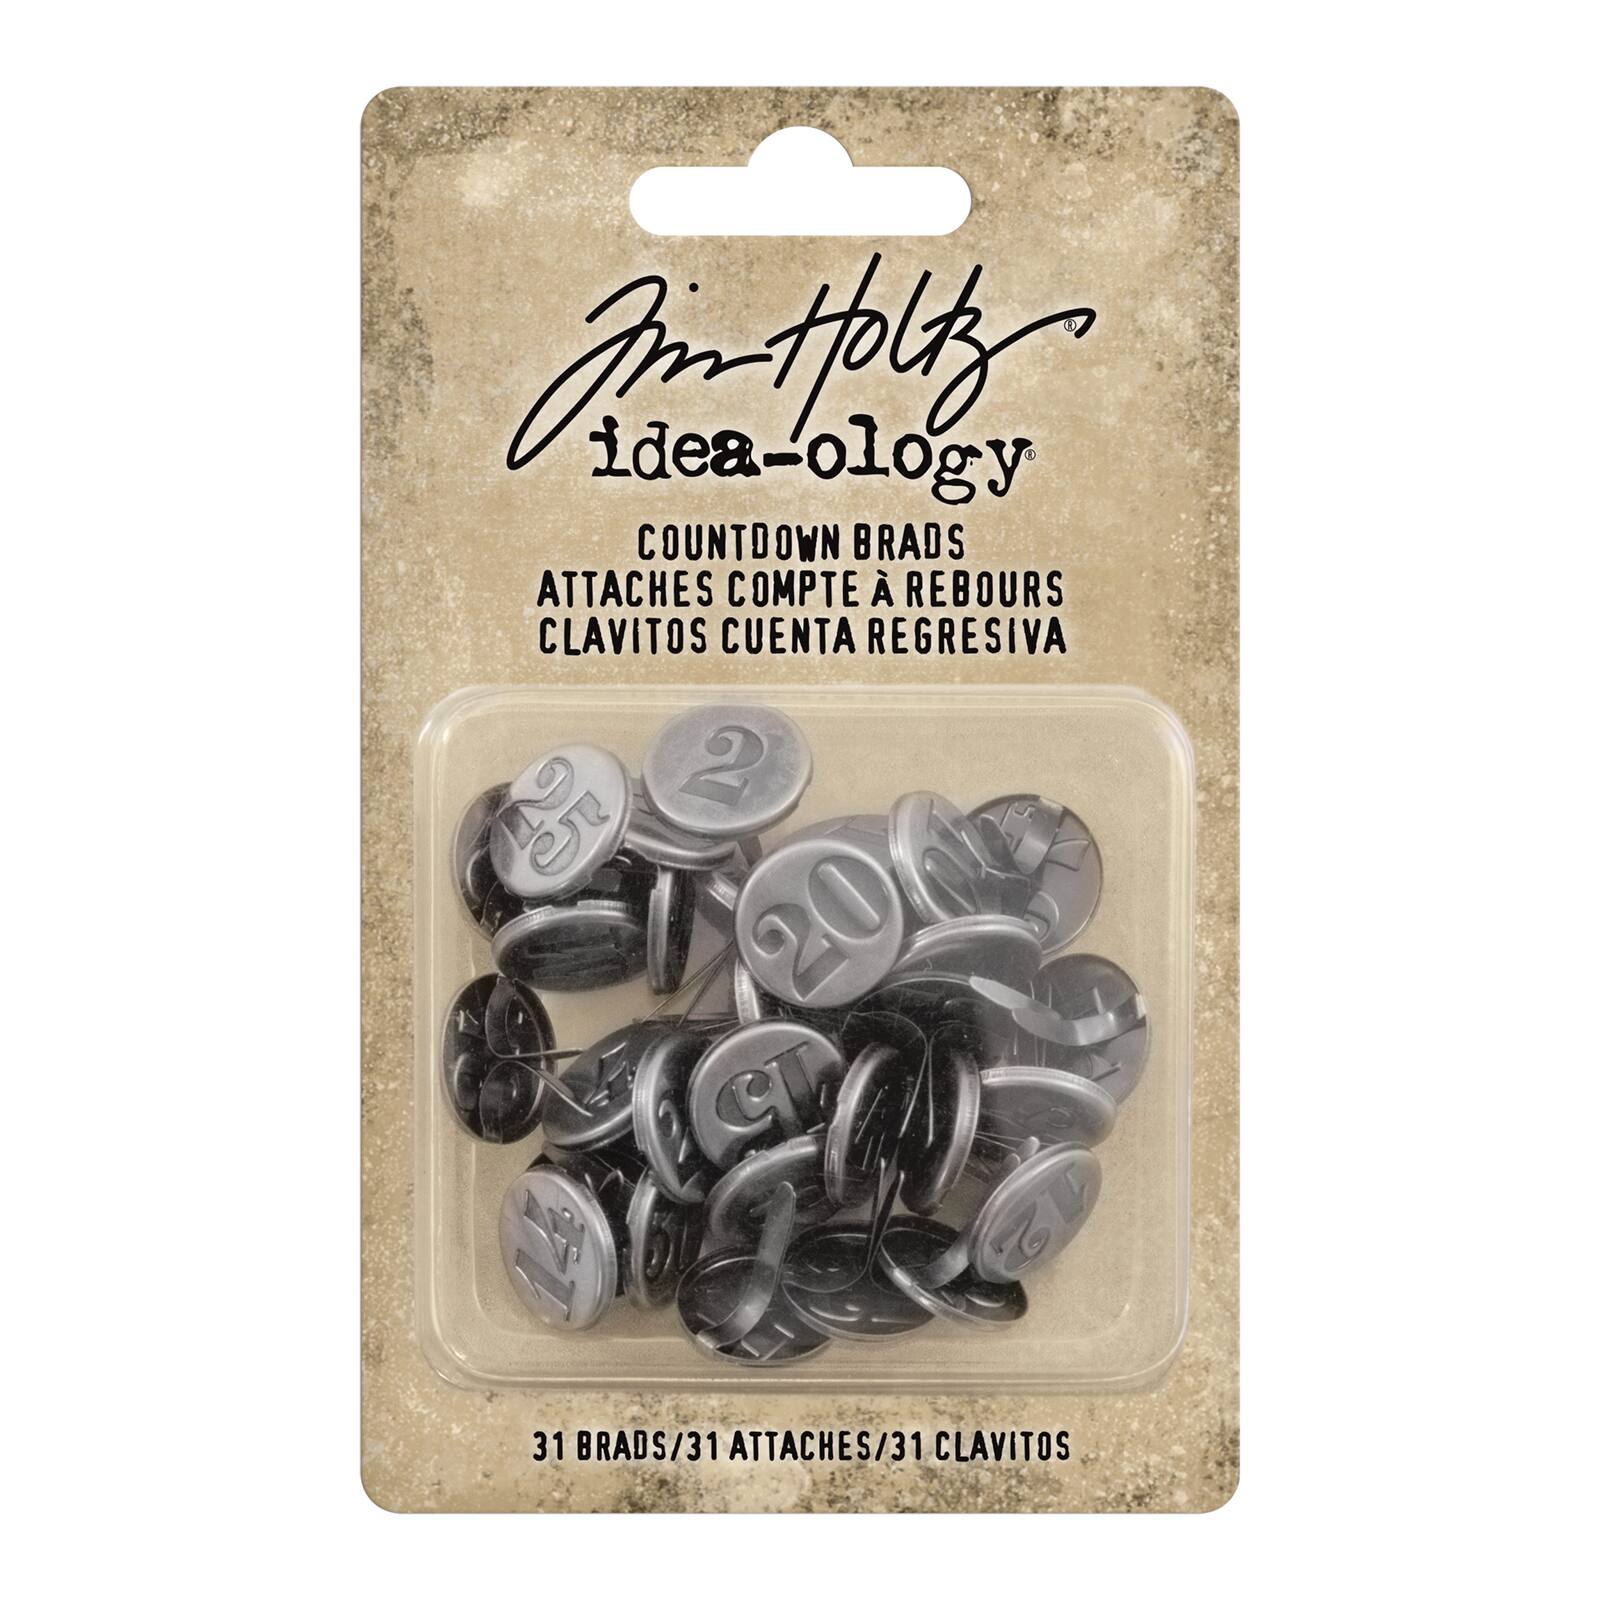 Shop for the Tim Holtz® Idea-Ology® Countdown Brads at Michaels